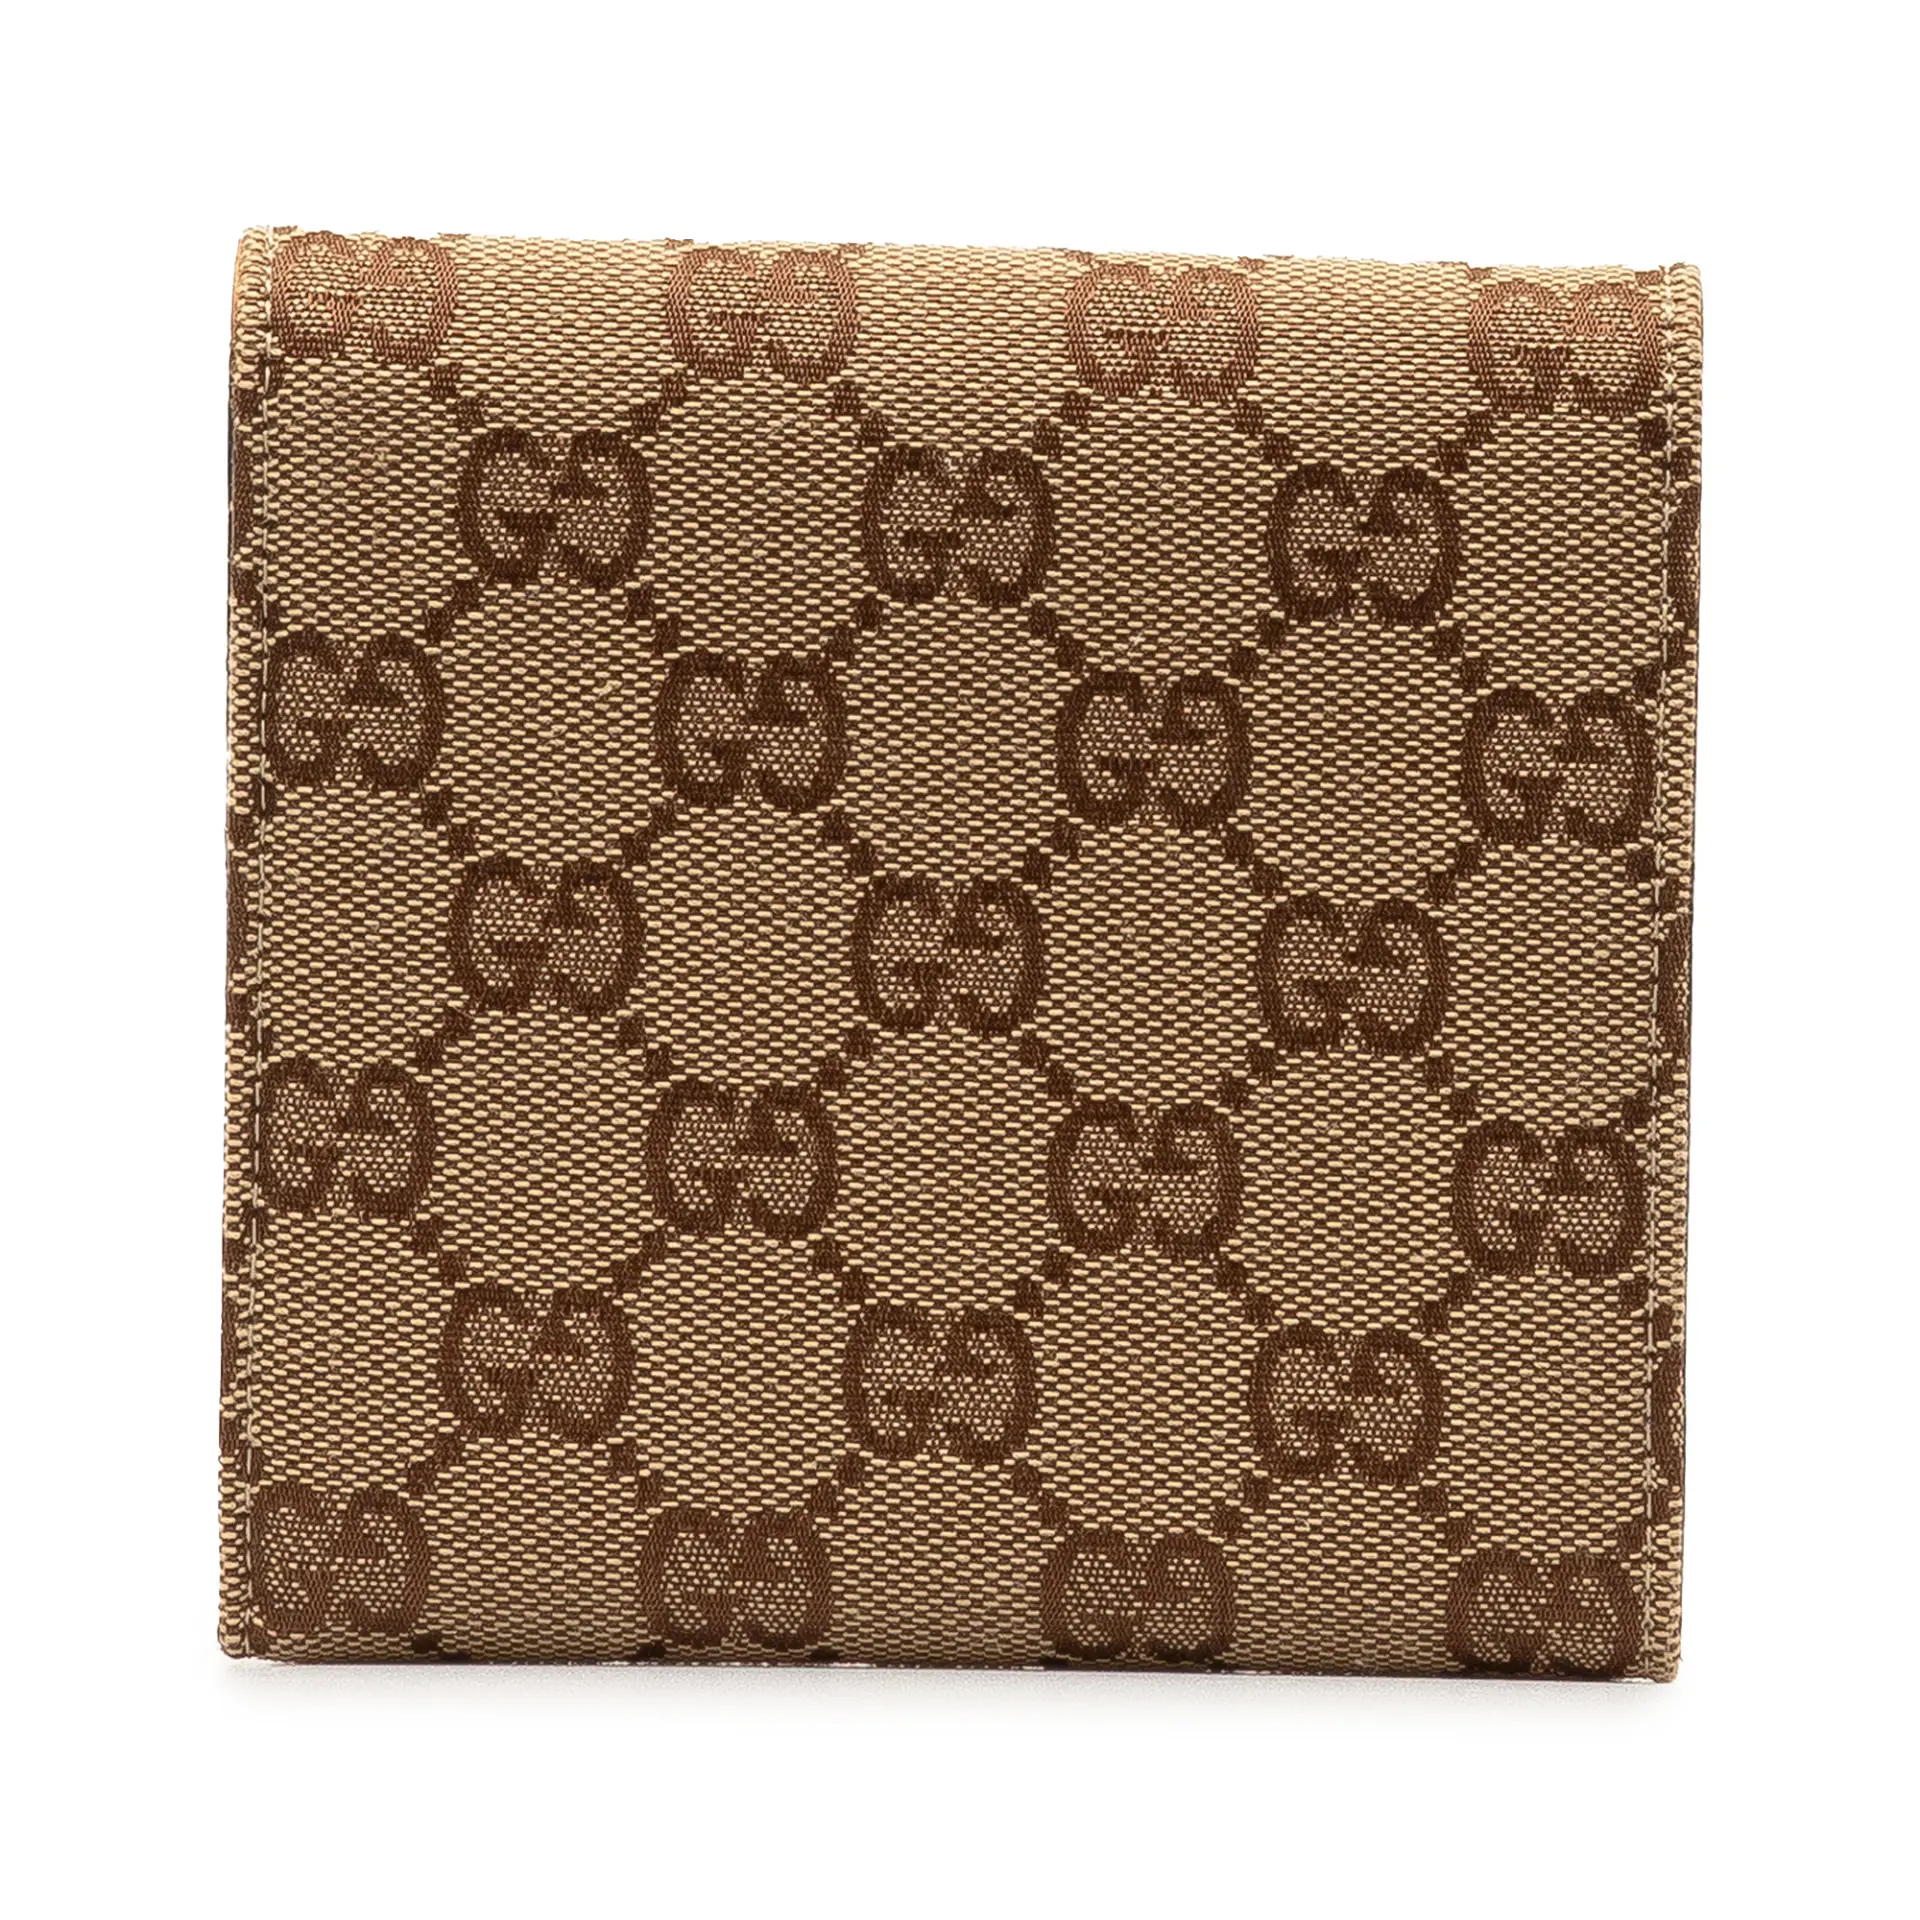 Gucci Gg Canvas Web Hasler Small Wallet